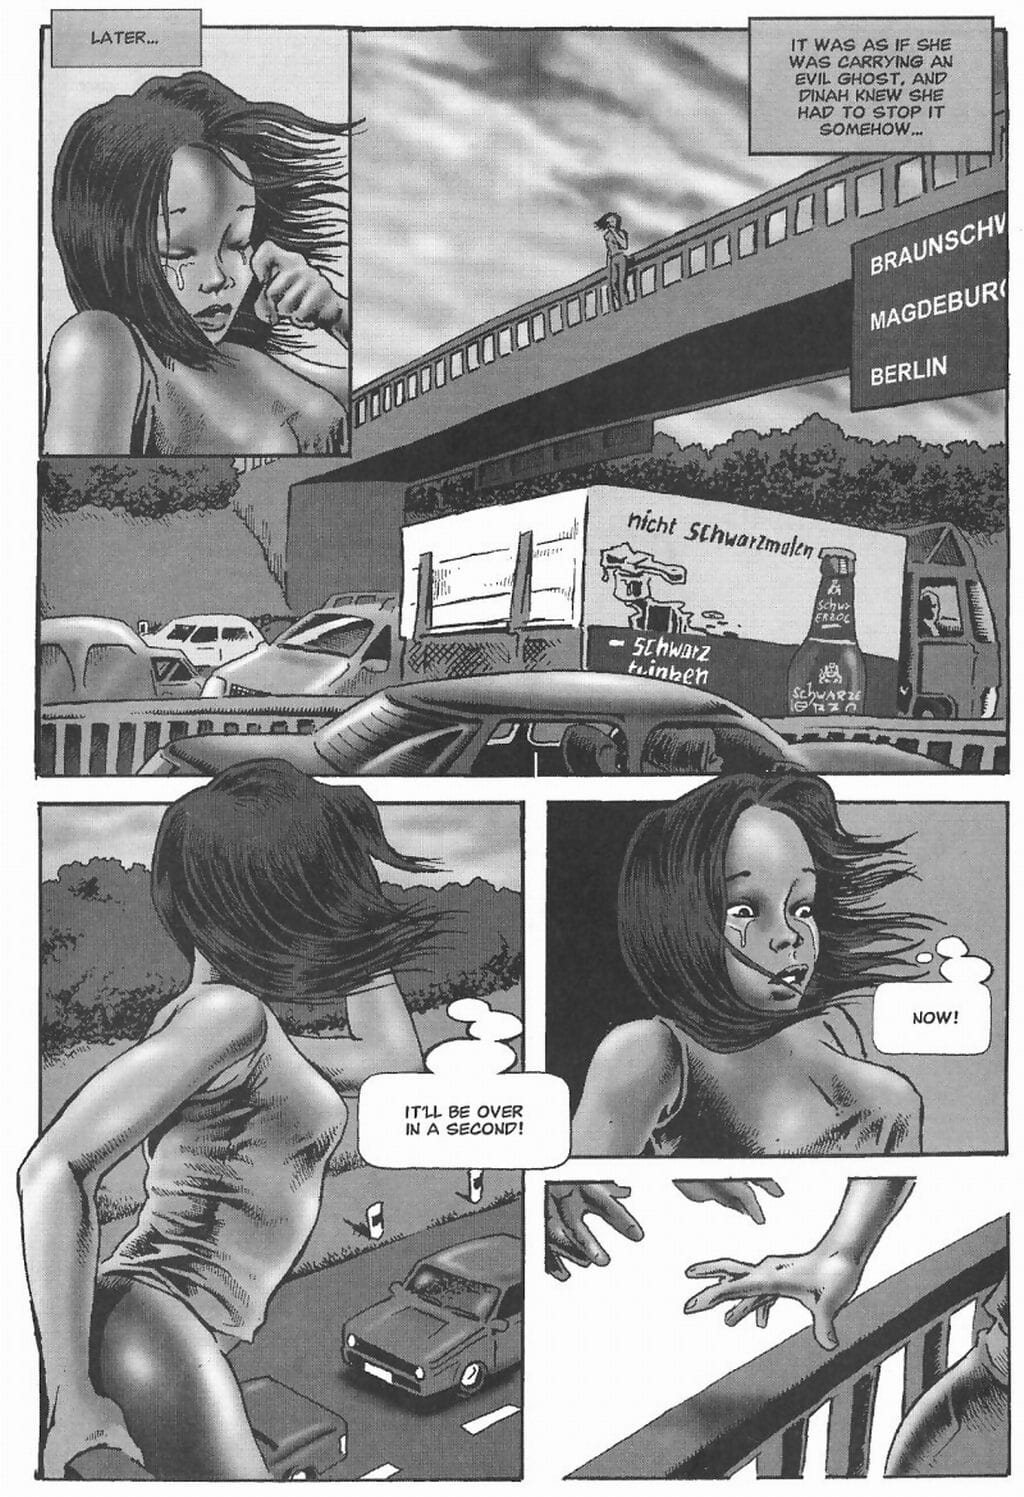 Alraune #3 page 1